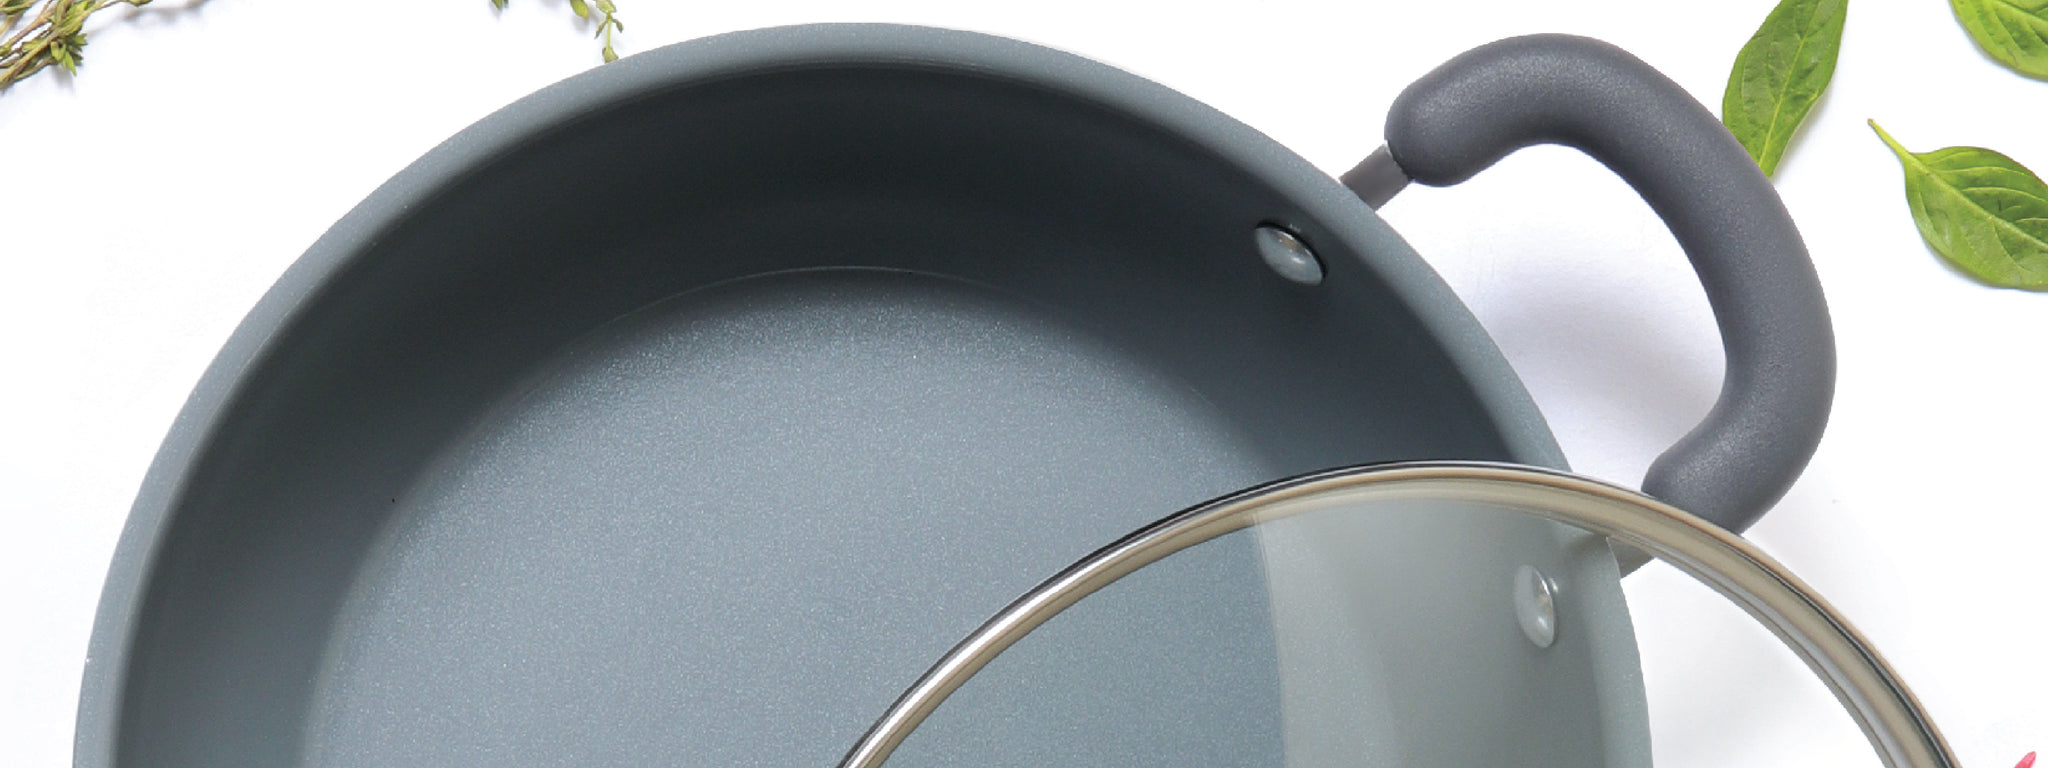 What are the best alternatives To Non-Stick Cookware